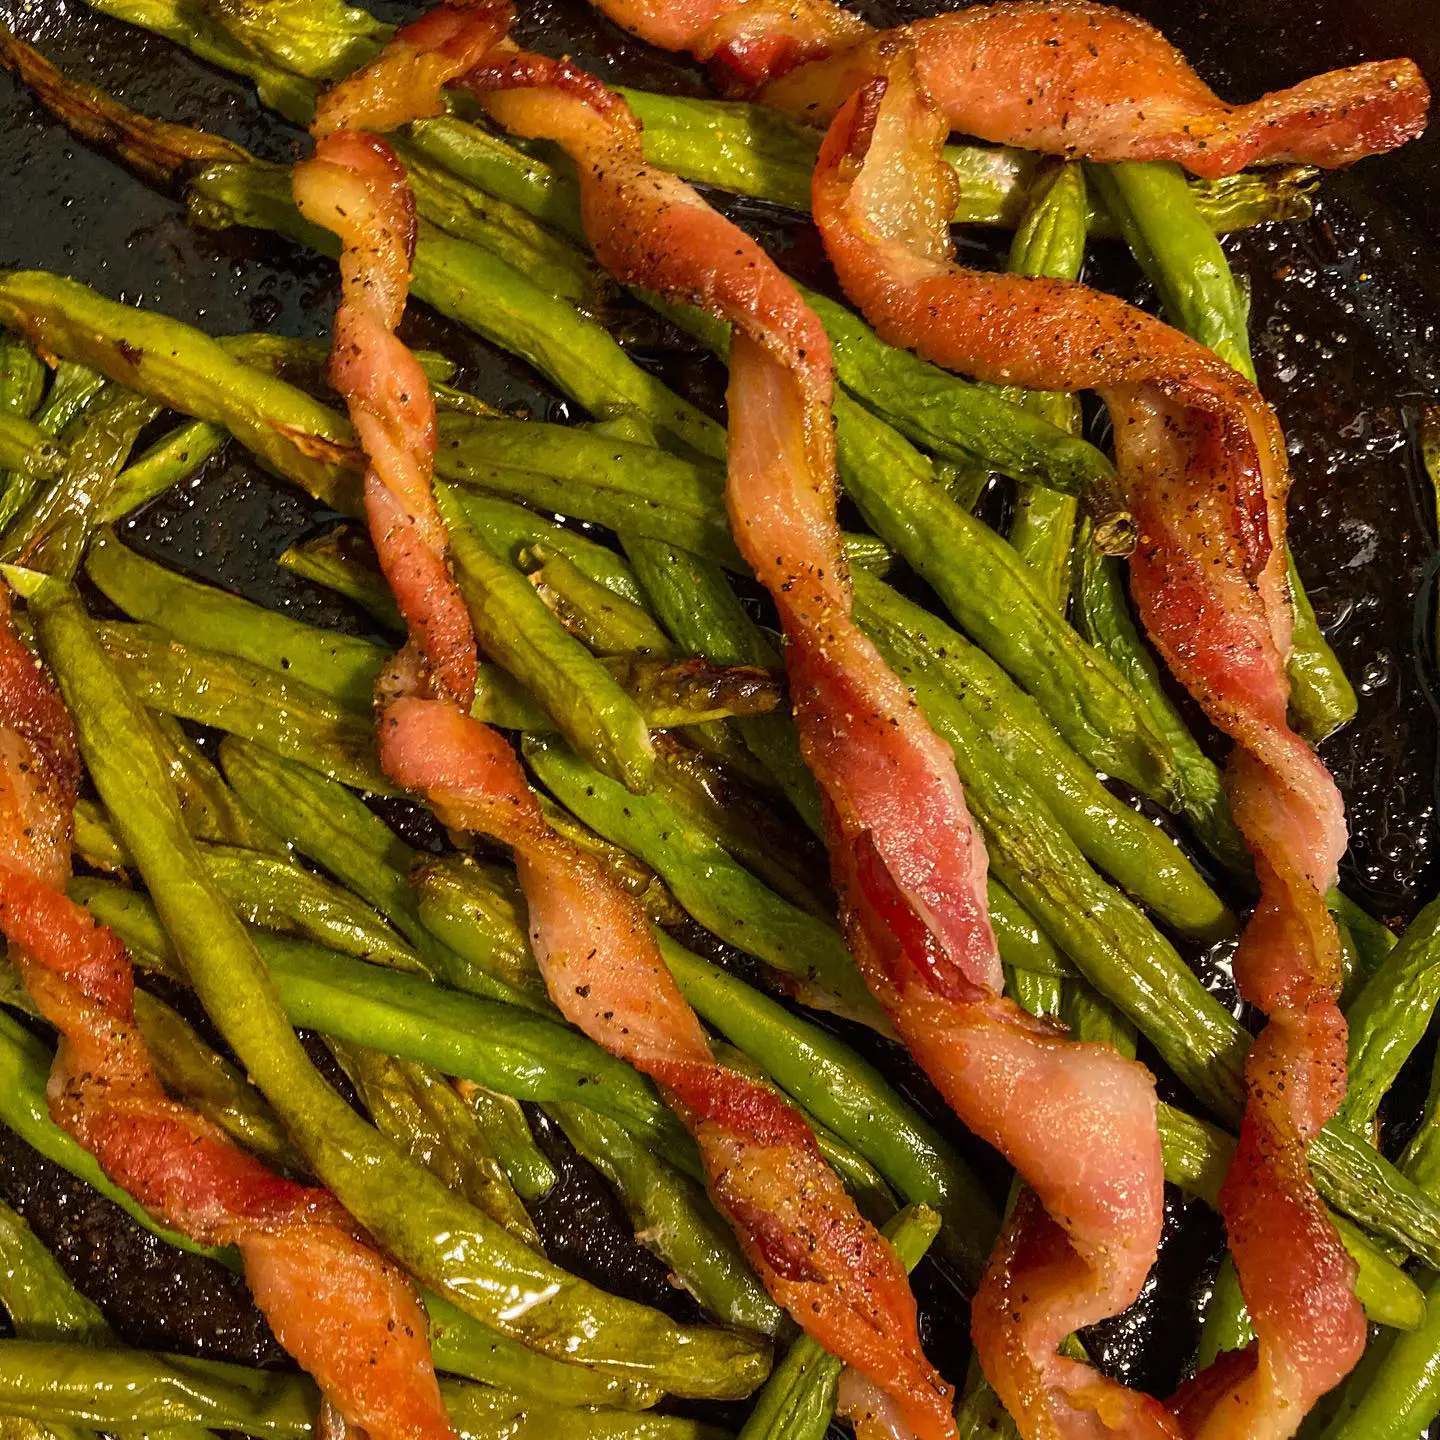 I don’t always do tik tok trends but when I do it’s because I have the ingredients already in my fridge. 
.
.
Let me tell you the spiral bacon hack is actually really great ESPECIALLY when you: toss green beans in a lil olive oil, lay them down in a skillet,
top with the spiral bacon, season everything with salt and pepper, and then roast at 400° degrees for 30-40 minutes! The green beans are flavored and you end up with these yummy bacon “fries” to serve on the side. It’s just darn good.
.
.
.
.
.
.
.
.
#bacon #baconlovers #tiktoktrending #homecooking #foodiesfeed #instaeats #instayum #foodblogger #foodpic #dailyfoodfeed #heresmyfood #igfood #thekitchn #feedfeed #blackfoodie #blackfoodbloggers #eeeeeats #sidedish #easyrecipes #foodporn